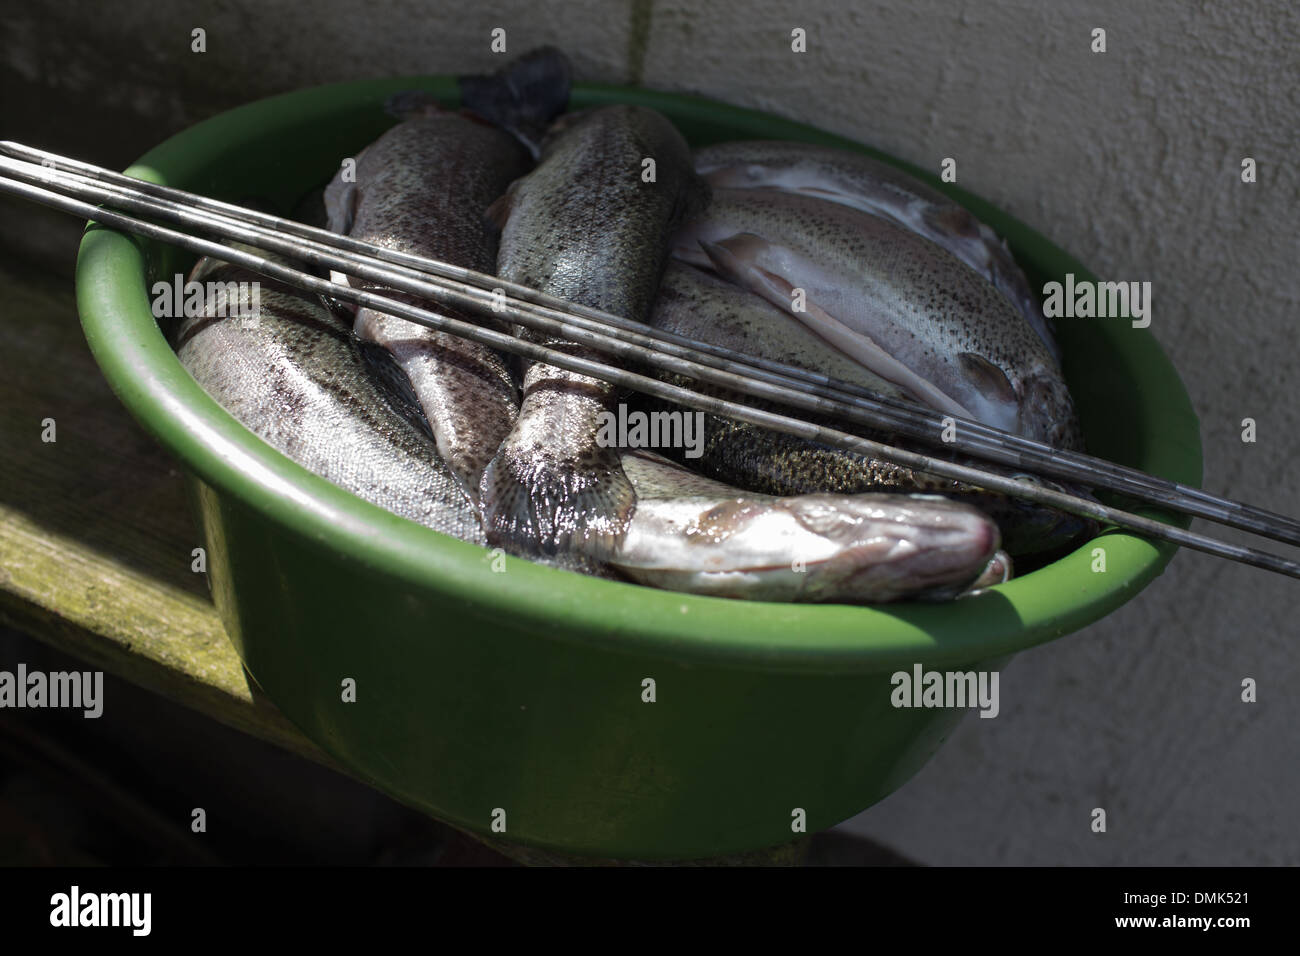 Preparation smoked trout in Polish cuisine conditions. Stock Photo